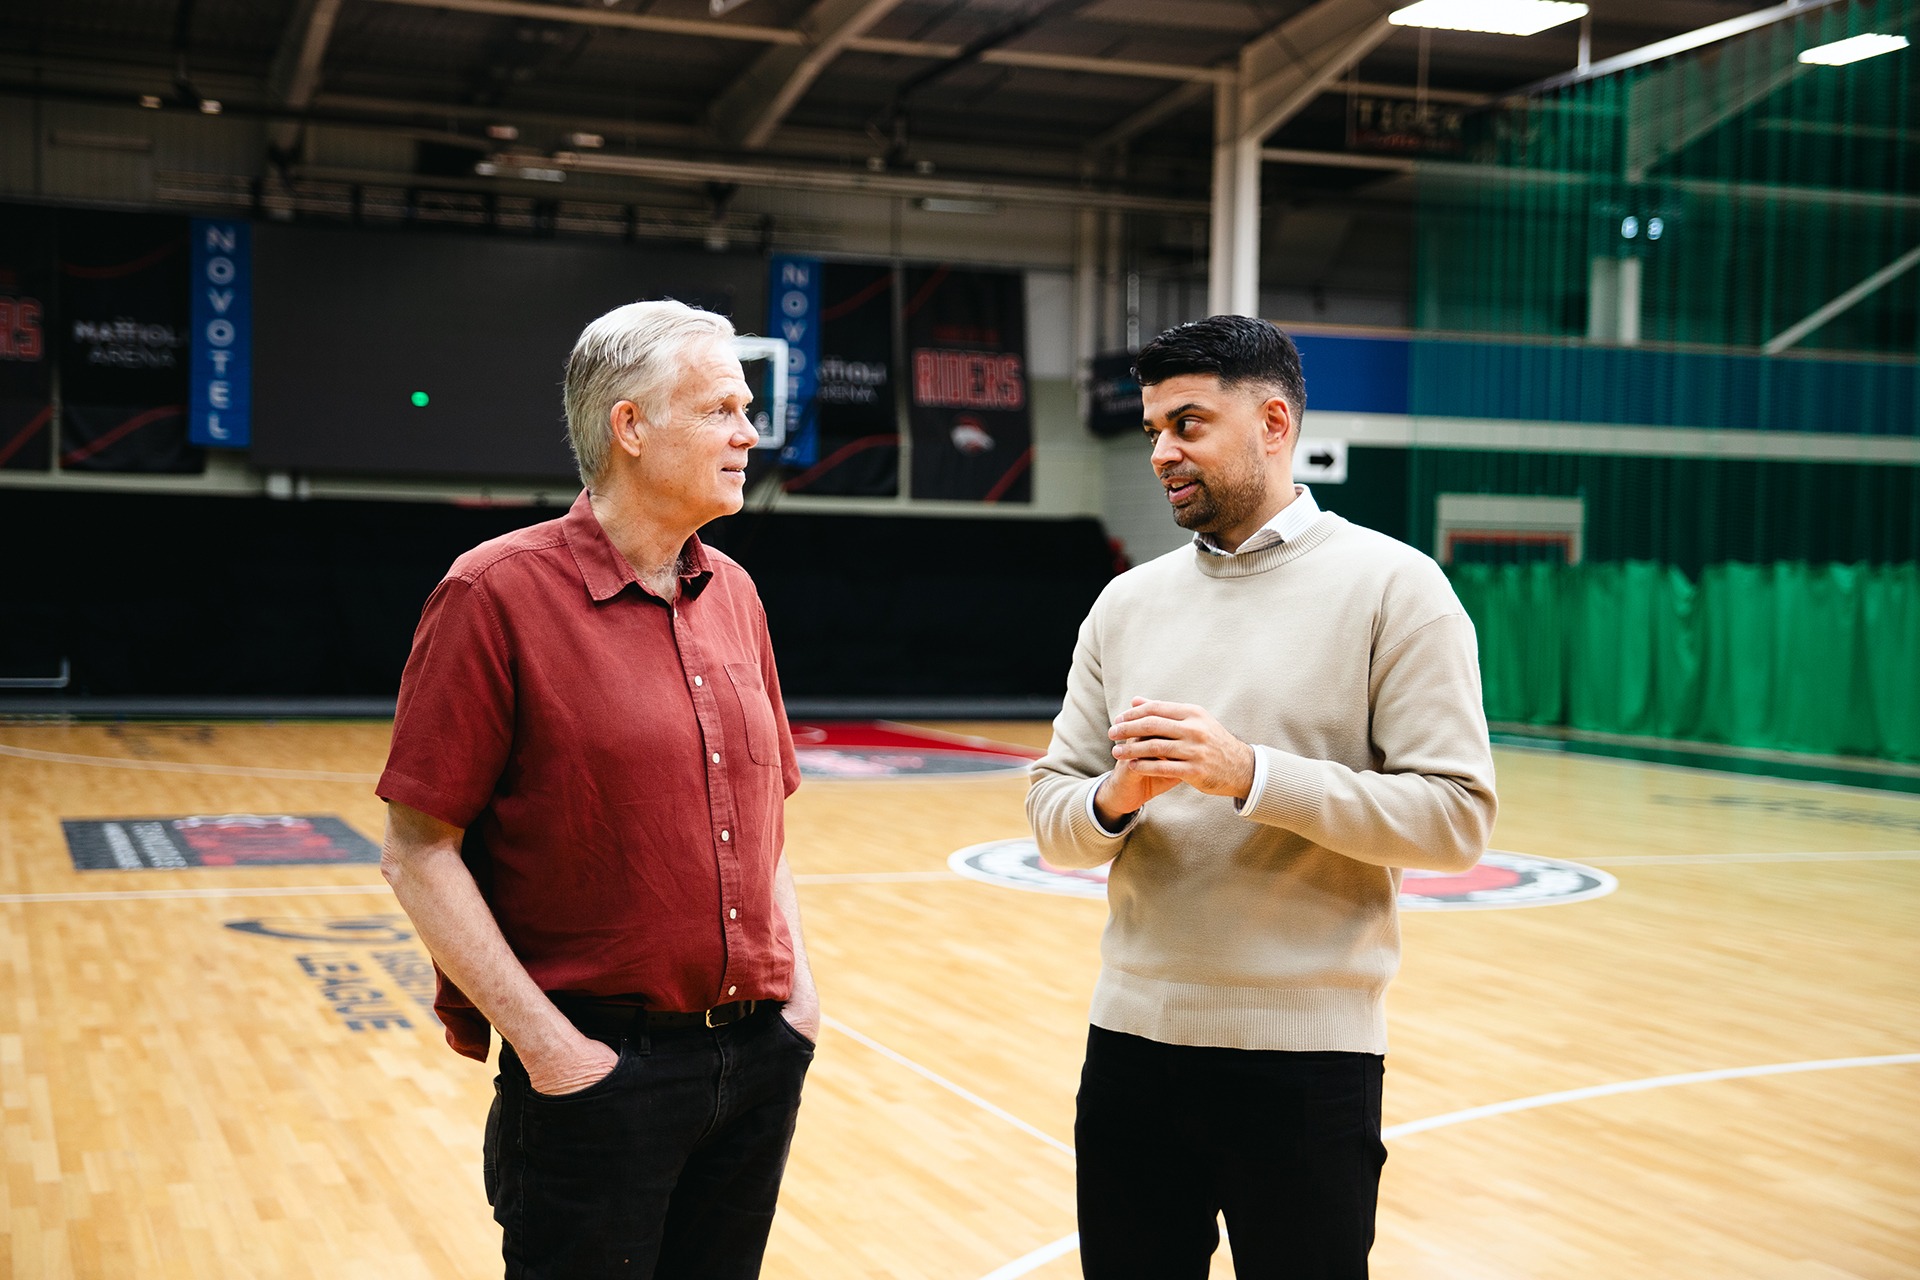 Kevin Routledge, Chairman of Leicester Riders, and Jas Hayer, Global Sales Director at Cyferd, discuss the impact AI can have in sport. 